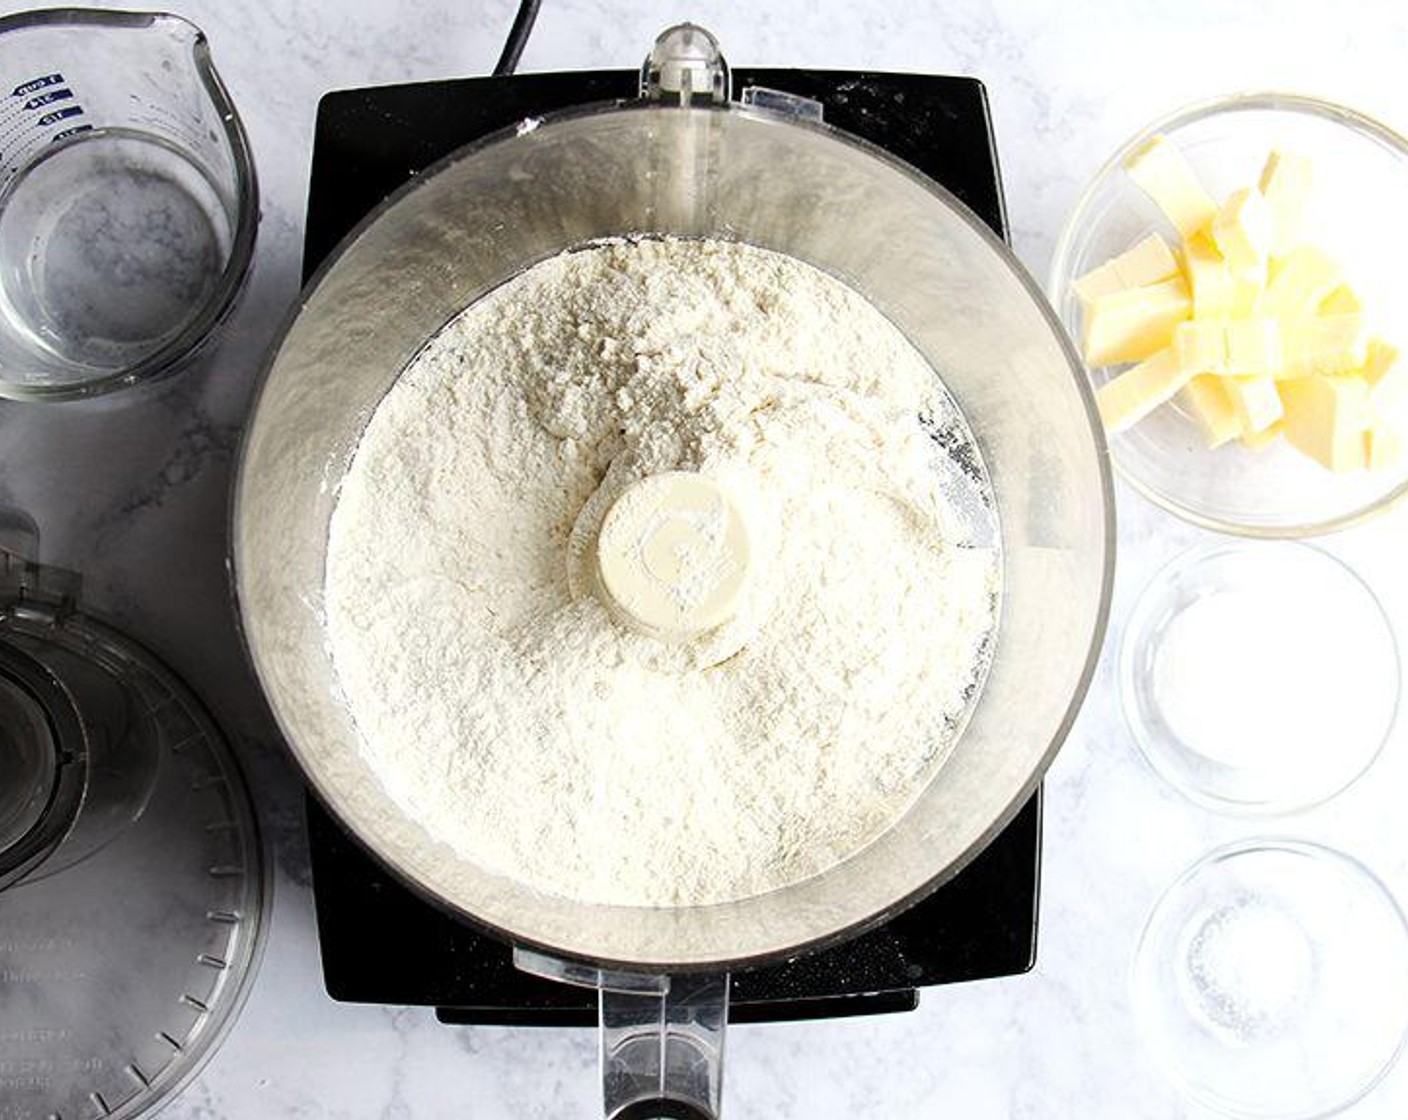 step 1 In the bowl of a food processor, pulse the All-Purpose Flour (2 1/2 cups), Granulated Sugar (2 Tbsp) and Kosher Salt (1/2 tsp) together. Cut the Unsalted Butter (1 cup) into small pieces, then add to the food processor. Pulse at 1-second intervals until butter is the size of peas. Add the Water (1/2 cup) and pulse again about 10 times until the mixture is crumbly but holds together when pinched.